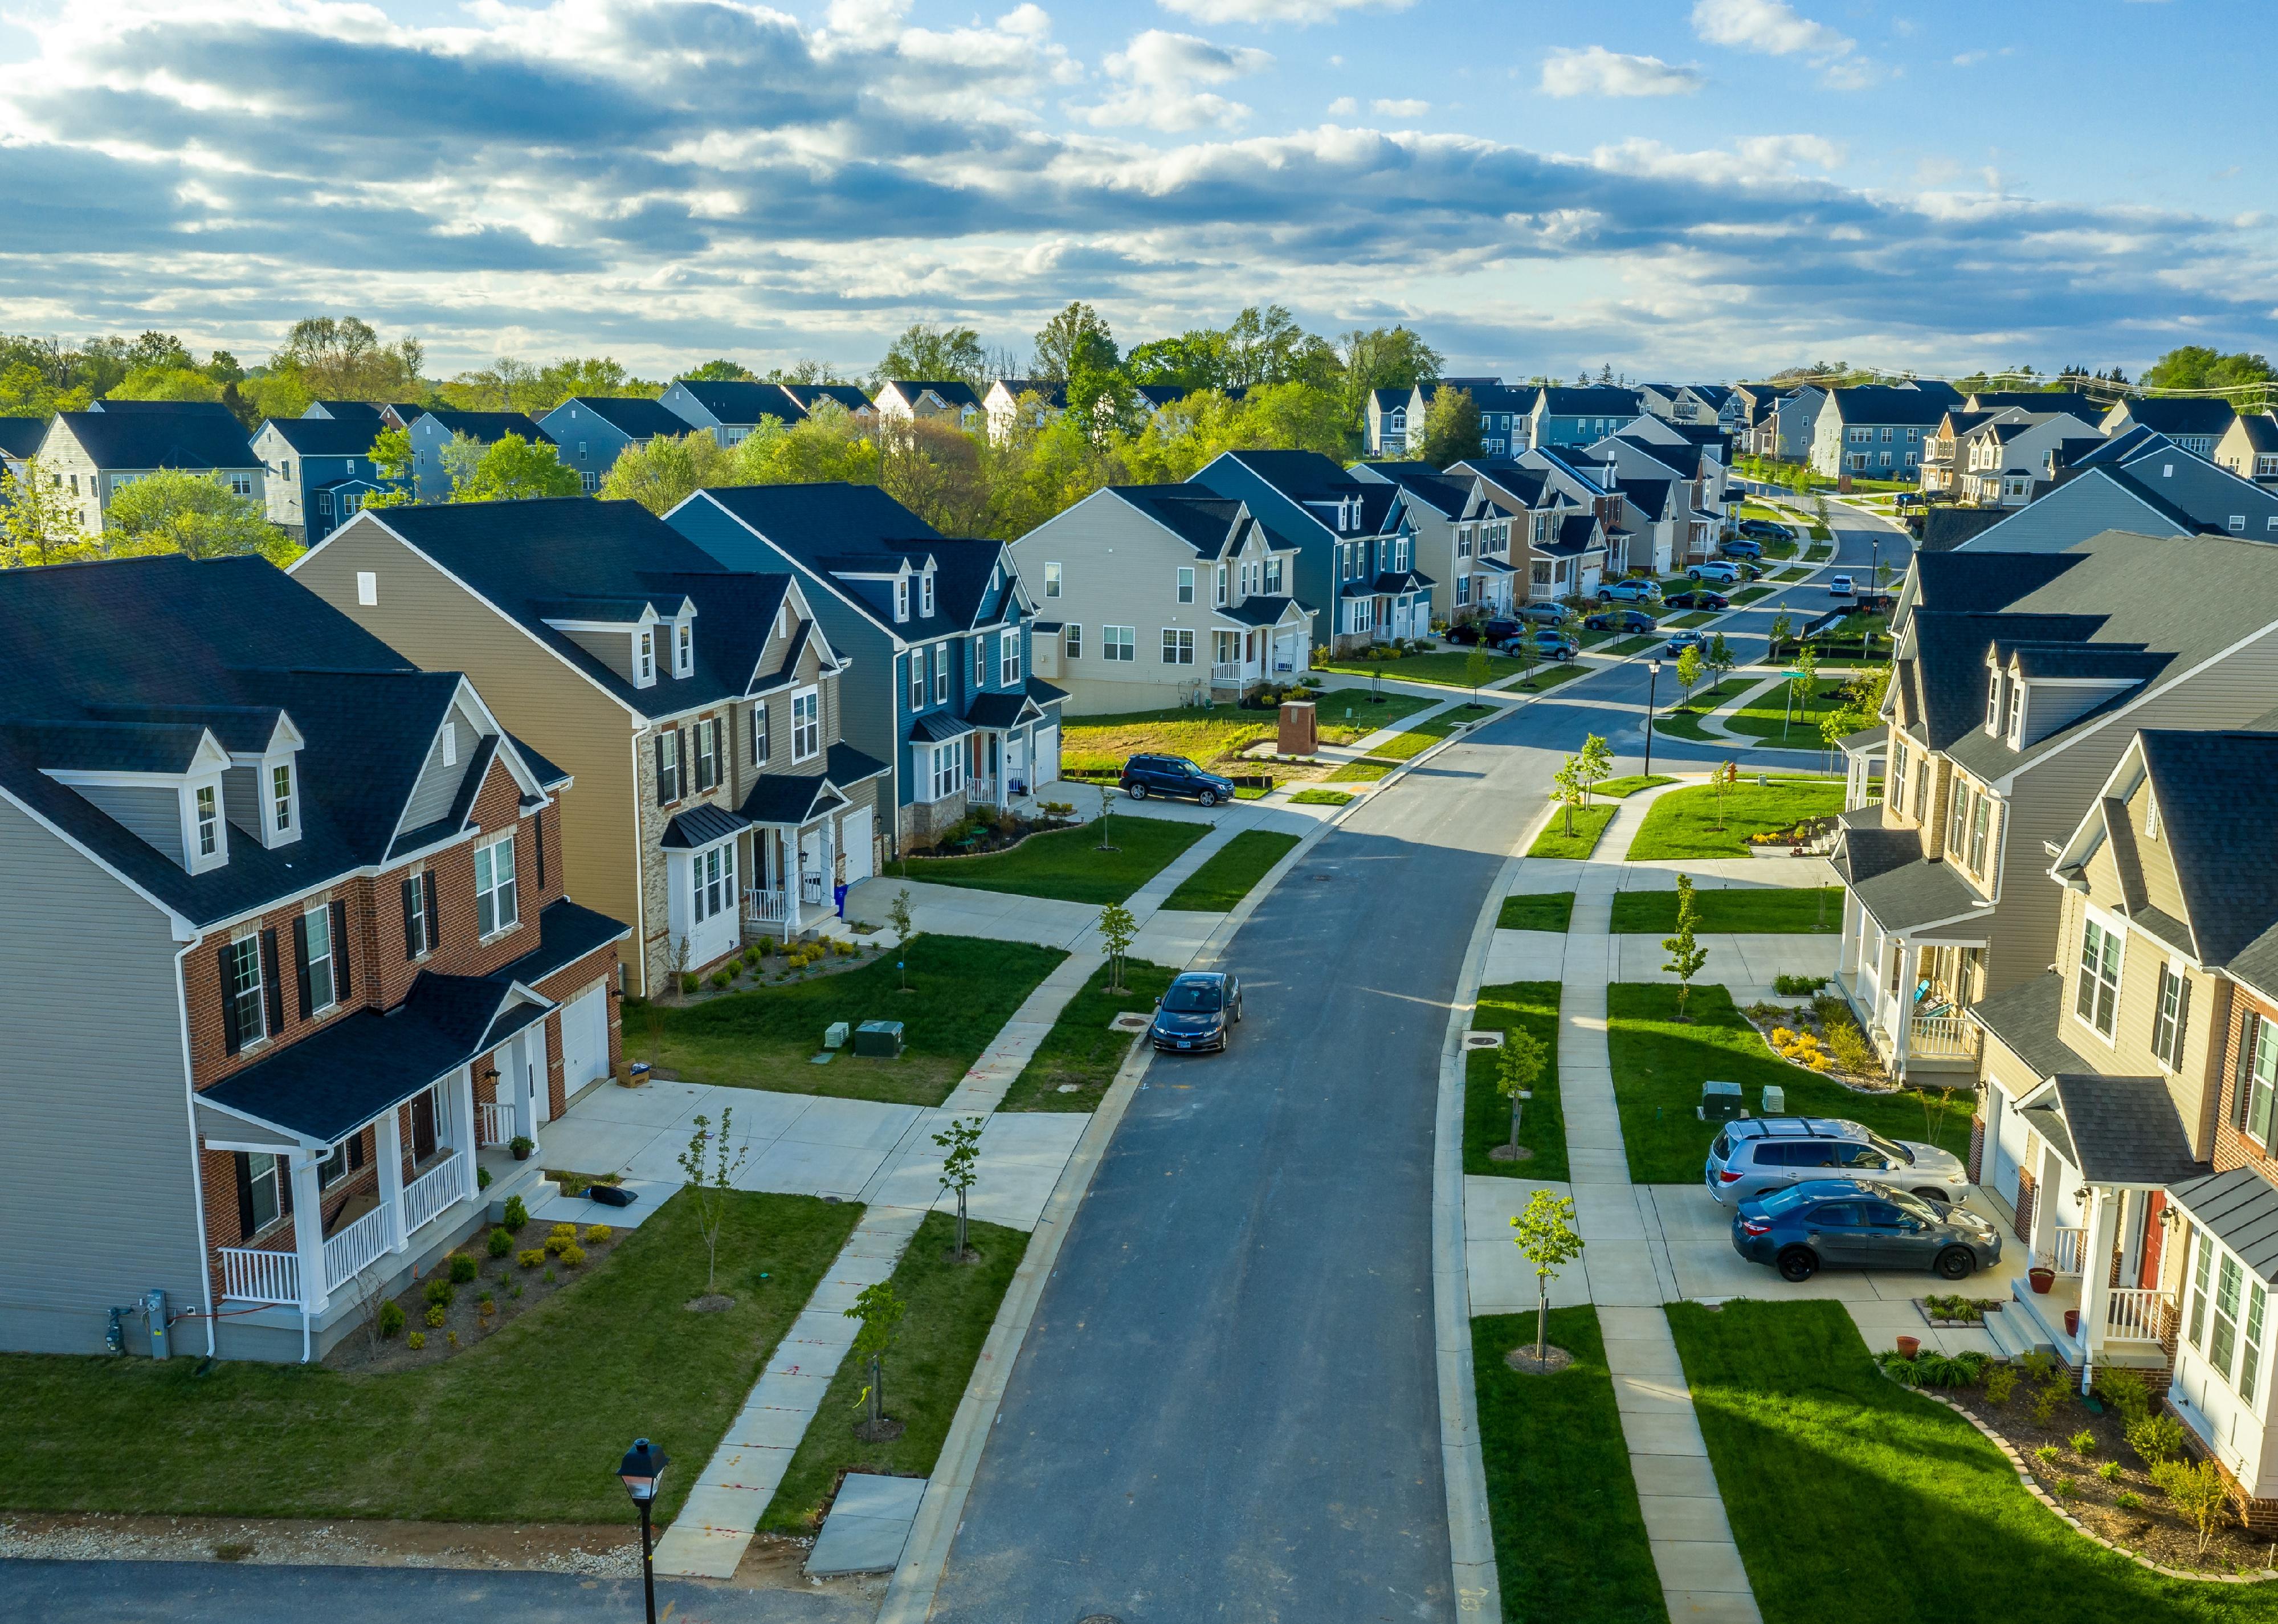 Aerial view of classic upper middle class neighborhood street in Maryland.